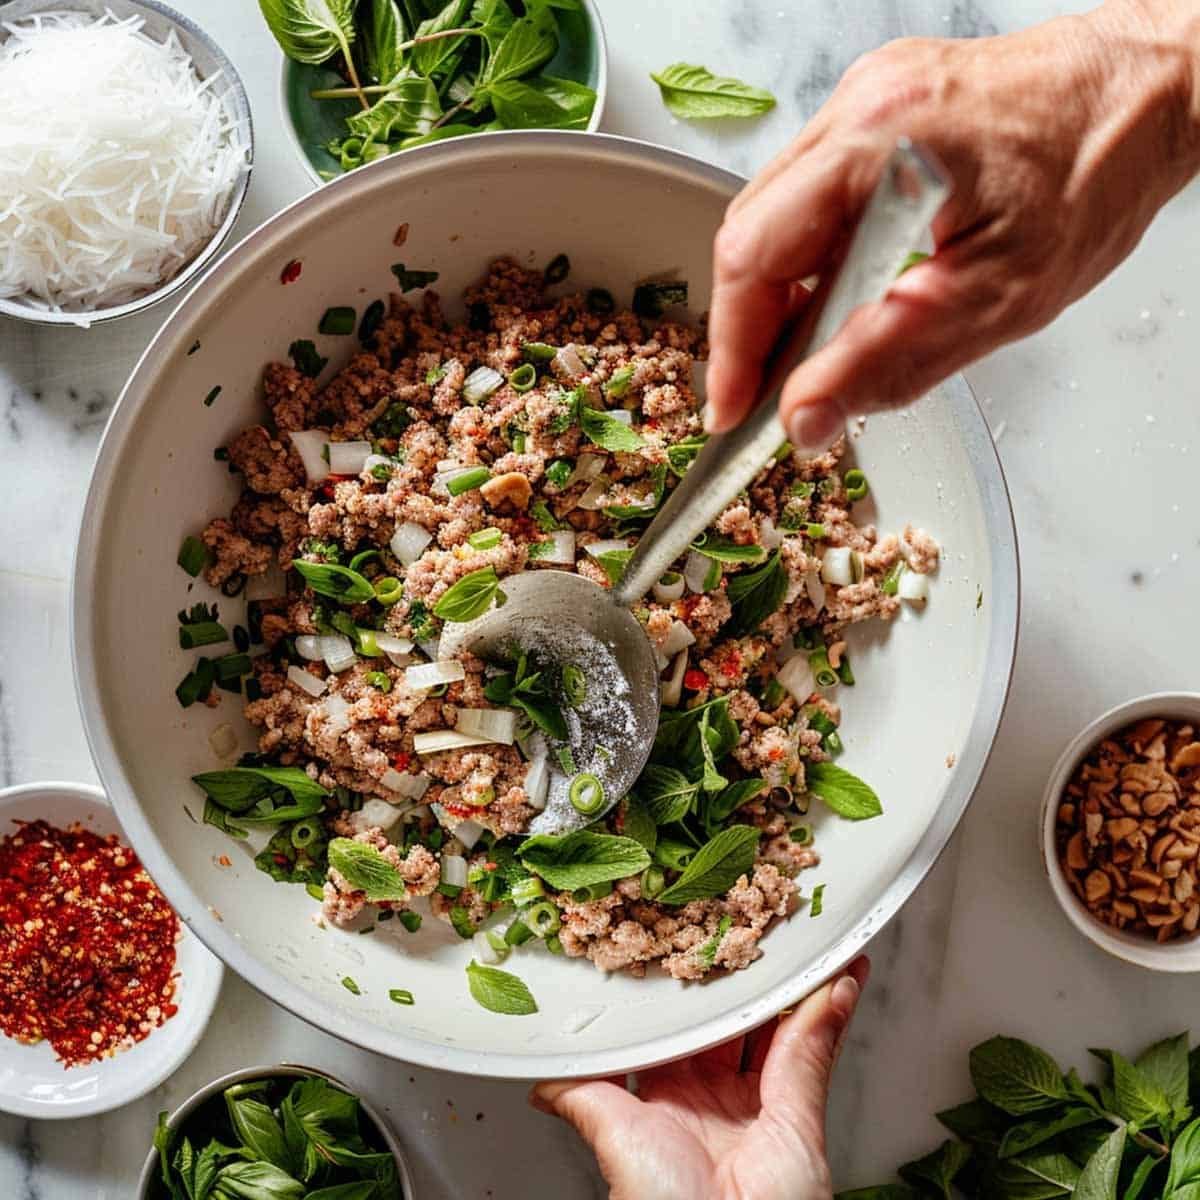 In a large bowl, the ingredients for Larb, also known as Laab, are being mixed together. The bowl contains minced meat, finely chopped herbs like mint and cilantro, lime juice, fish sauce, and a sprinkle of toasted ground rice. A hand with a mixing spoon is actively combining the ingredients, creating a vibrant and aromatic dish.